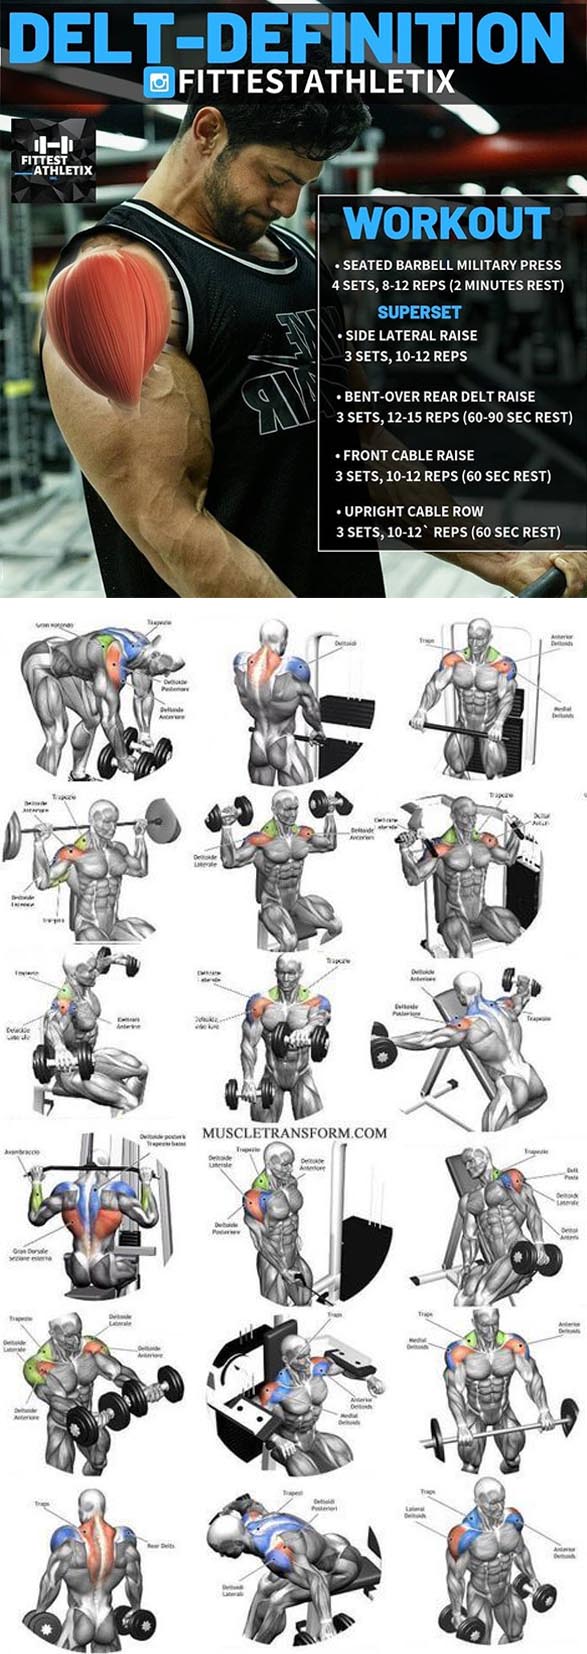 The Delts Workout